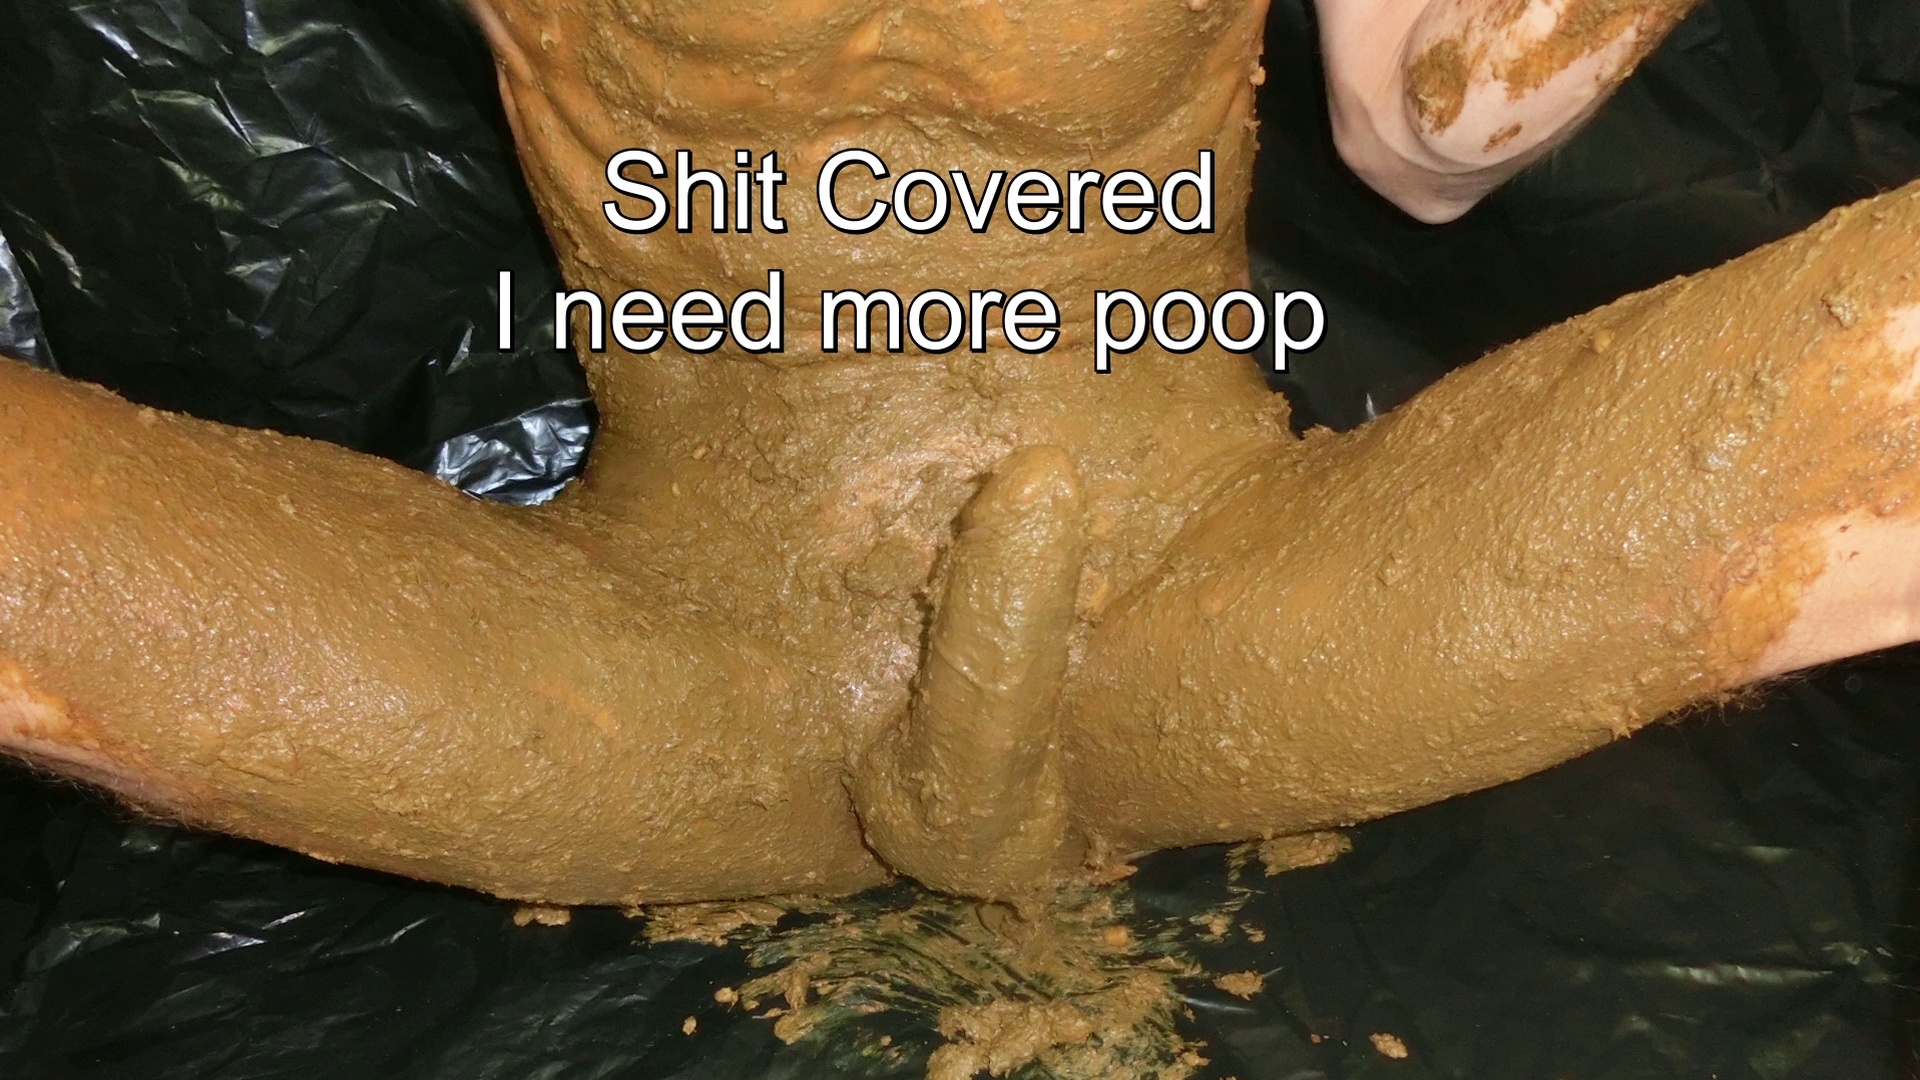 Shit covered - I need more poop to smear